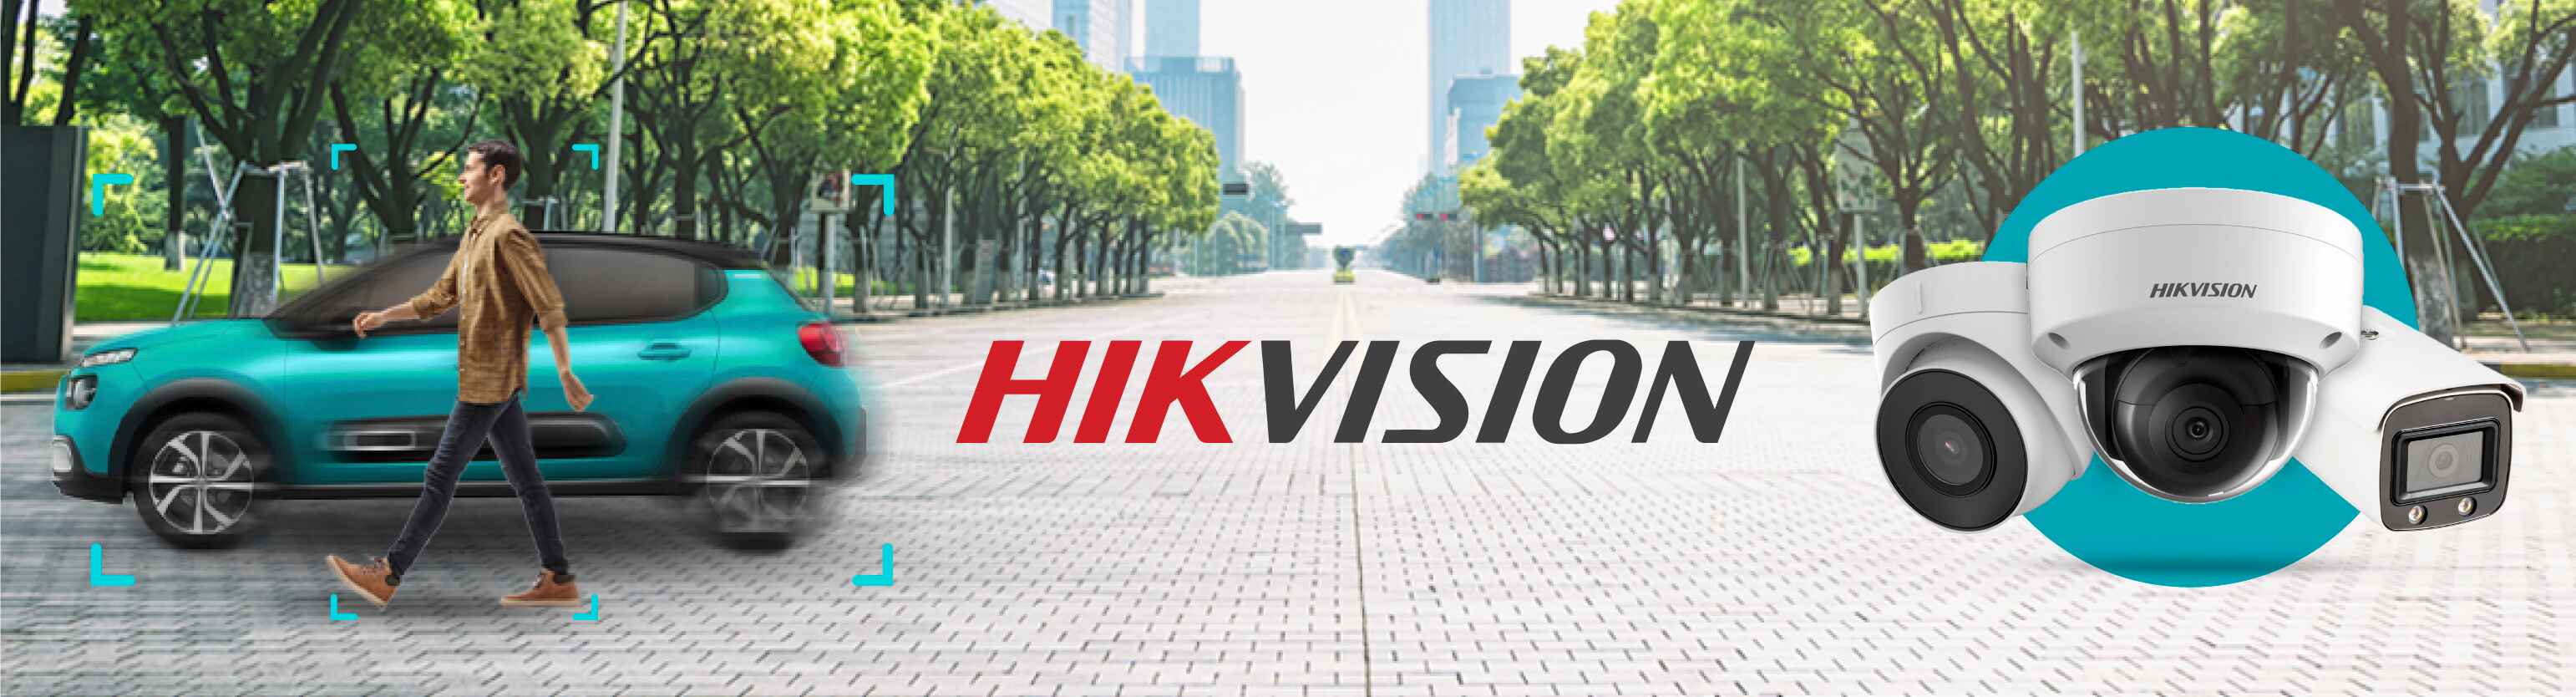 18-facts-about-hikvision